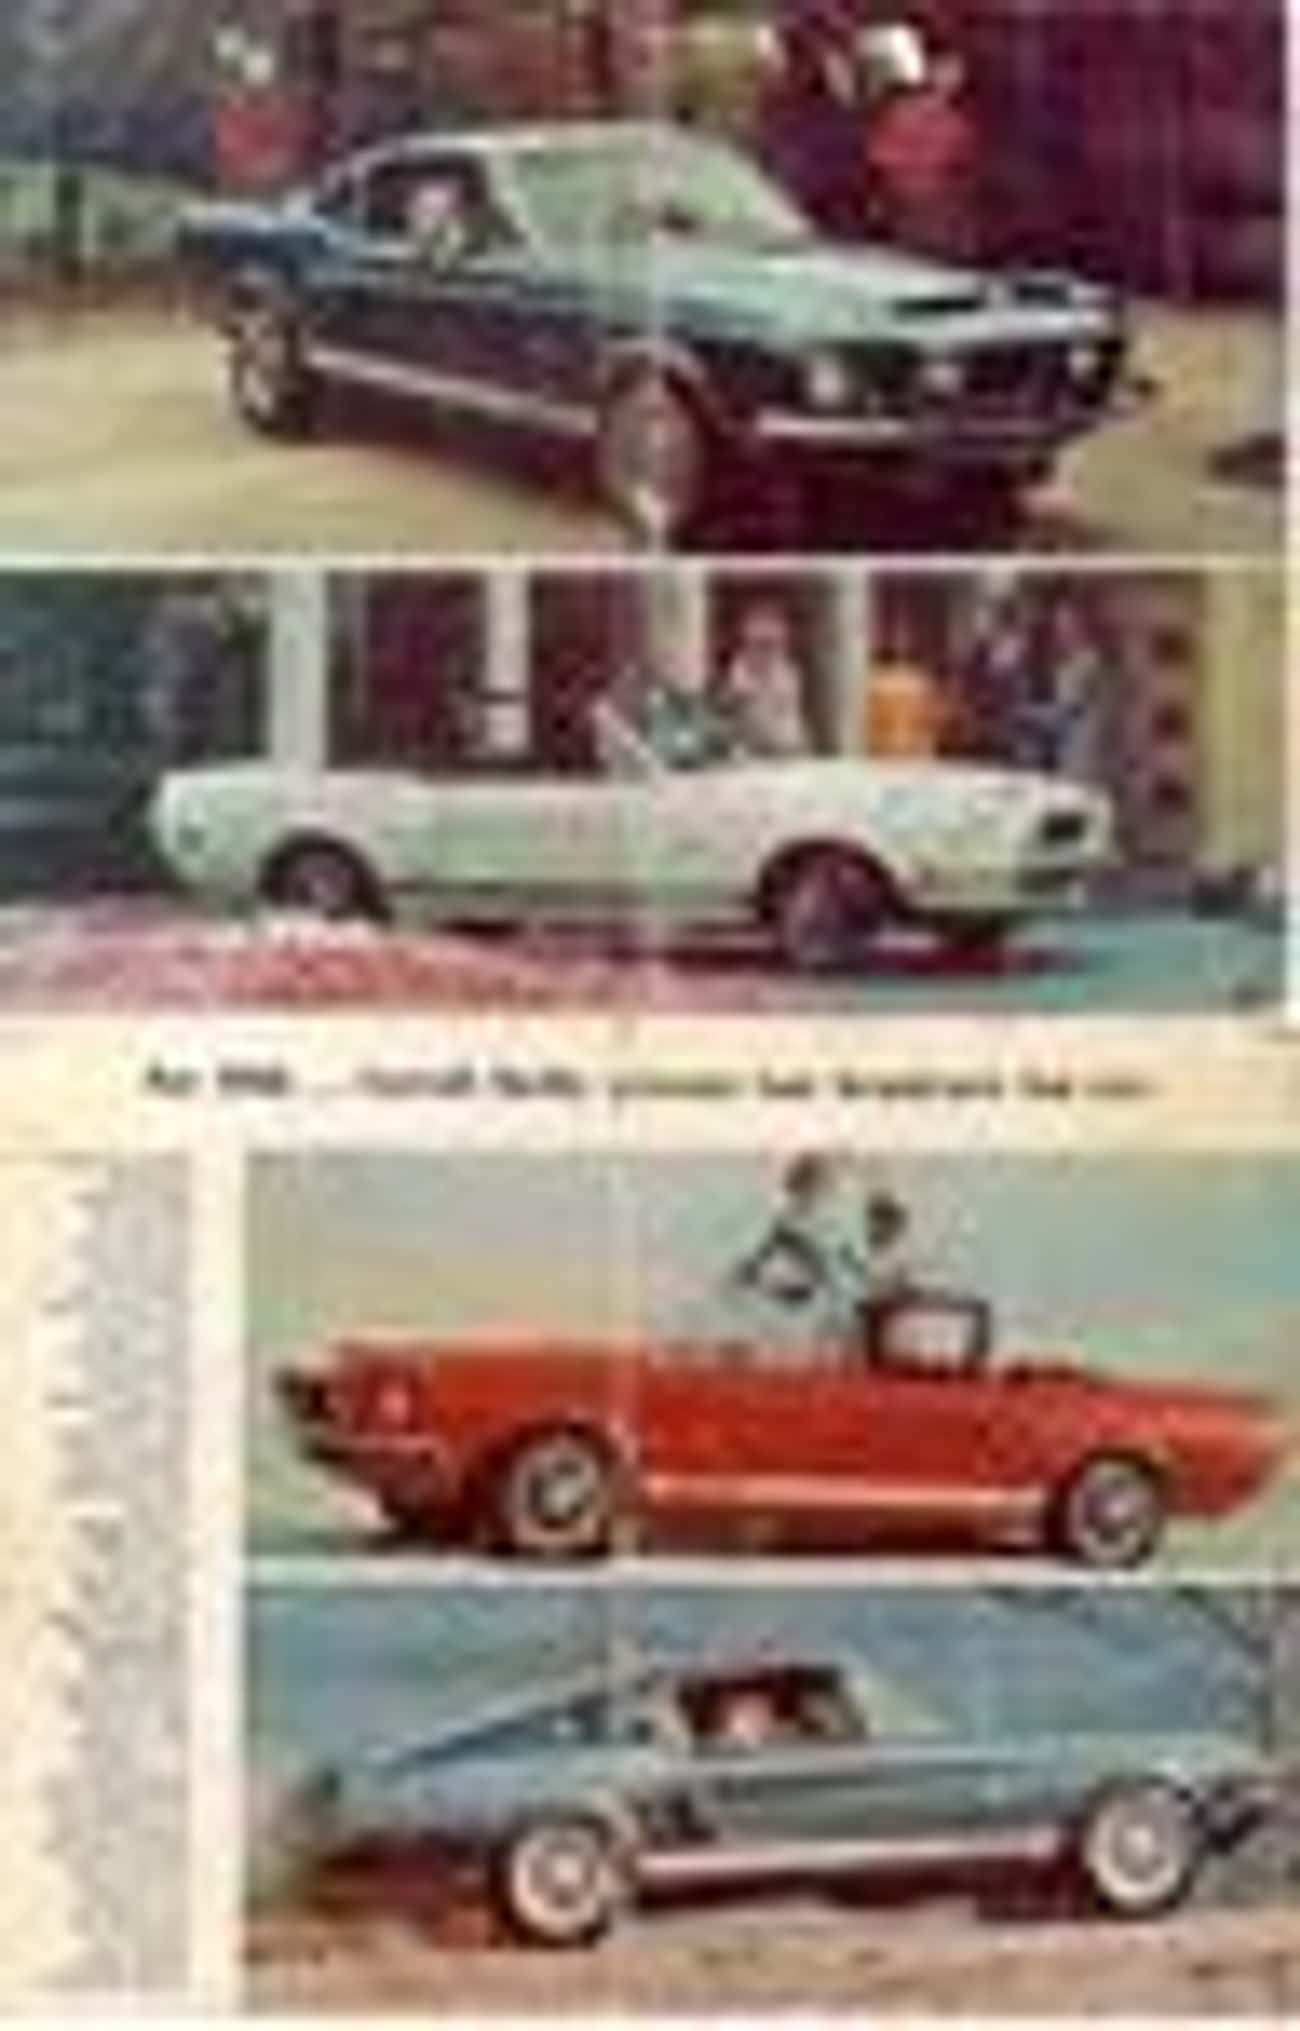 1968 Shelby GT500 1967-1968 Ford Mustang Fastback